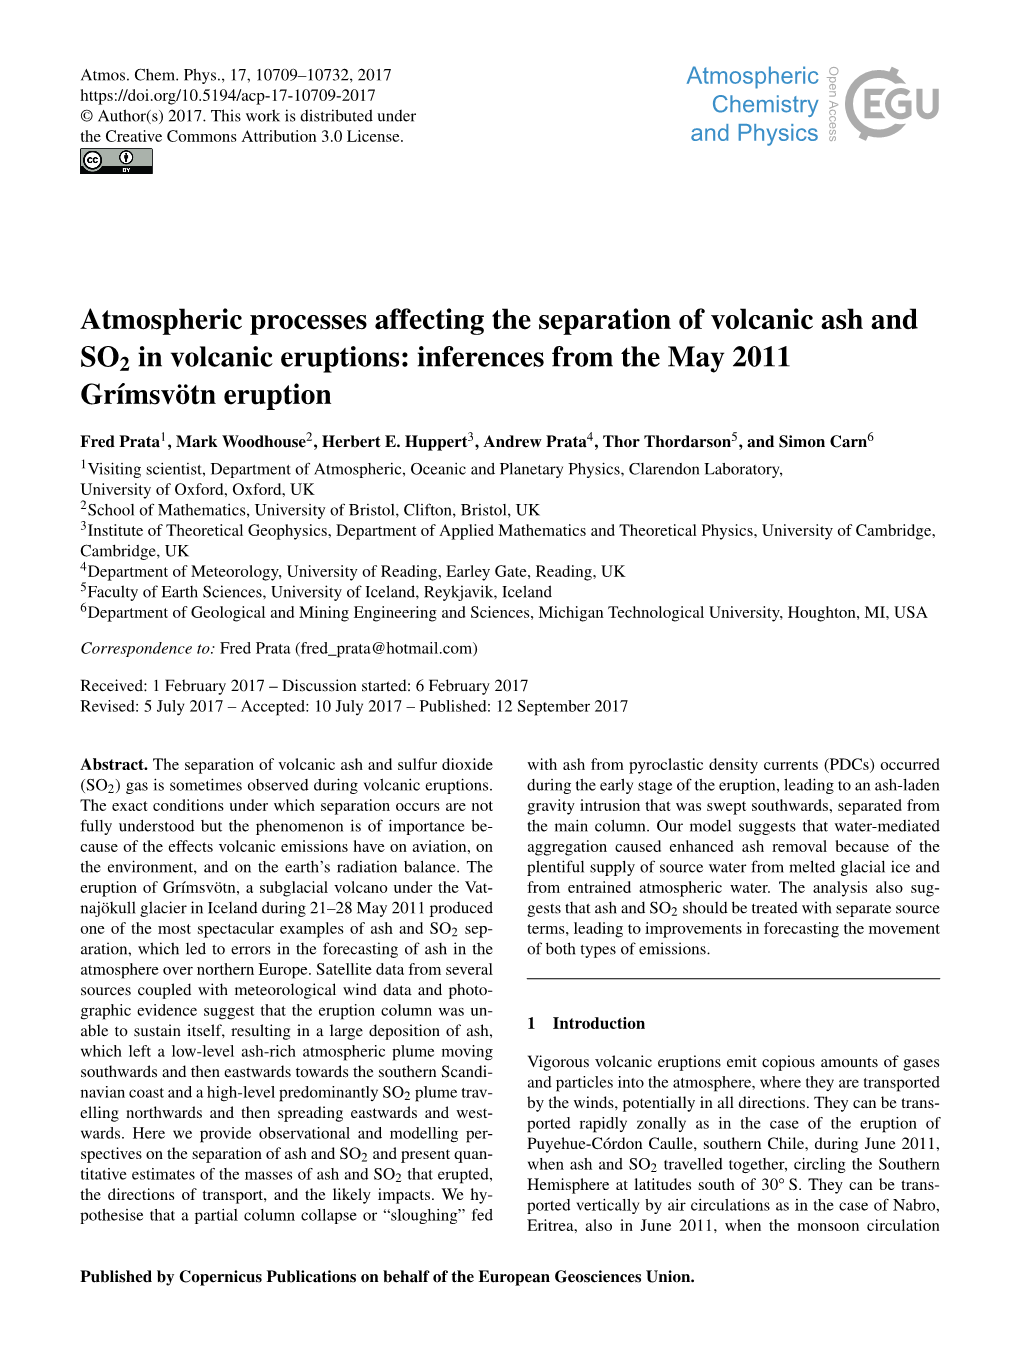 Atmospheric Processes Affecting the Separation of Volcanic Ash and SO2 in Volcanic Eruptions: Inferences from the May 2011 Grímsvötn Eruption